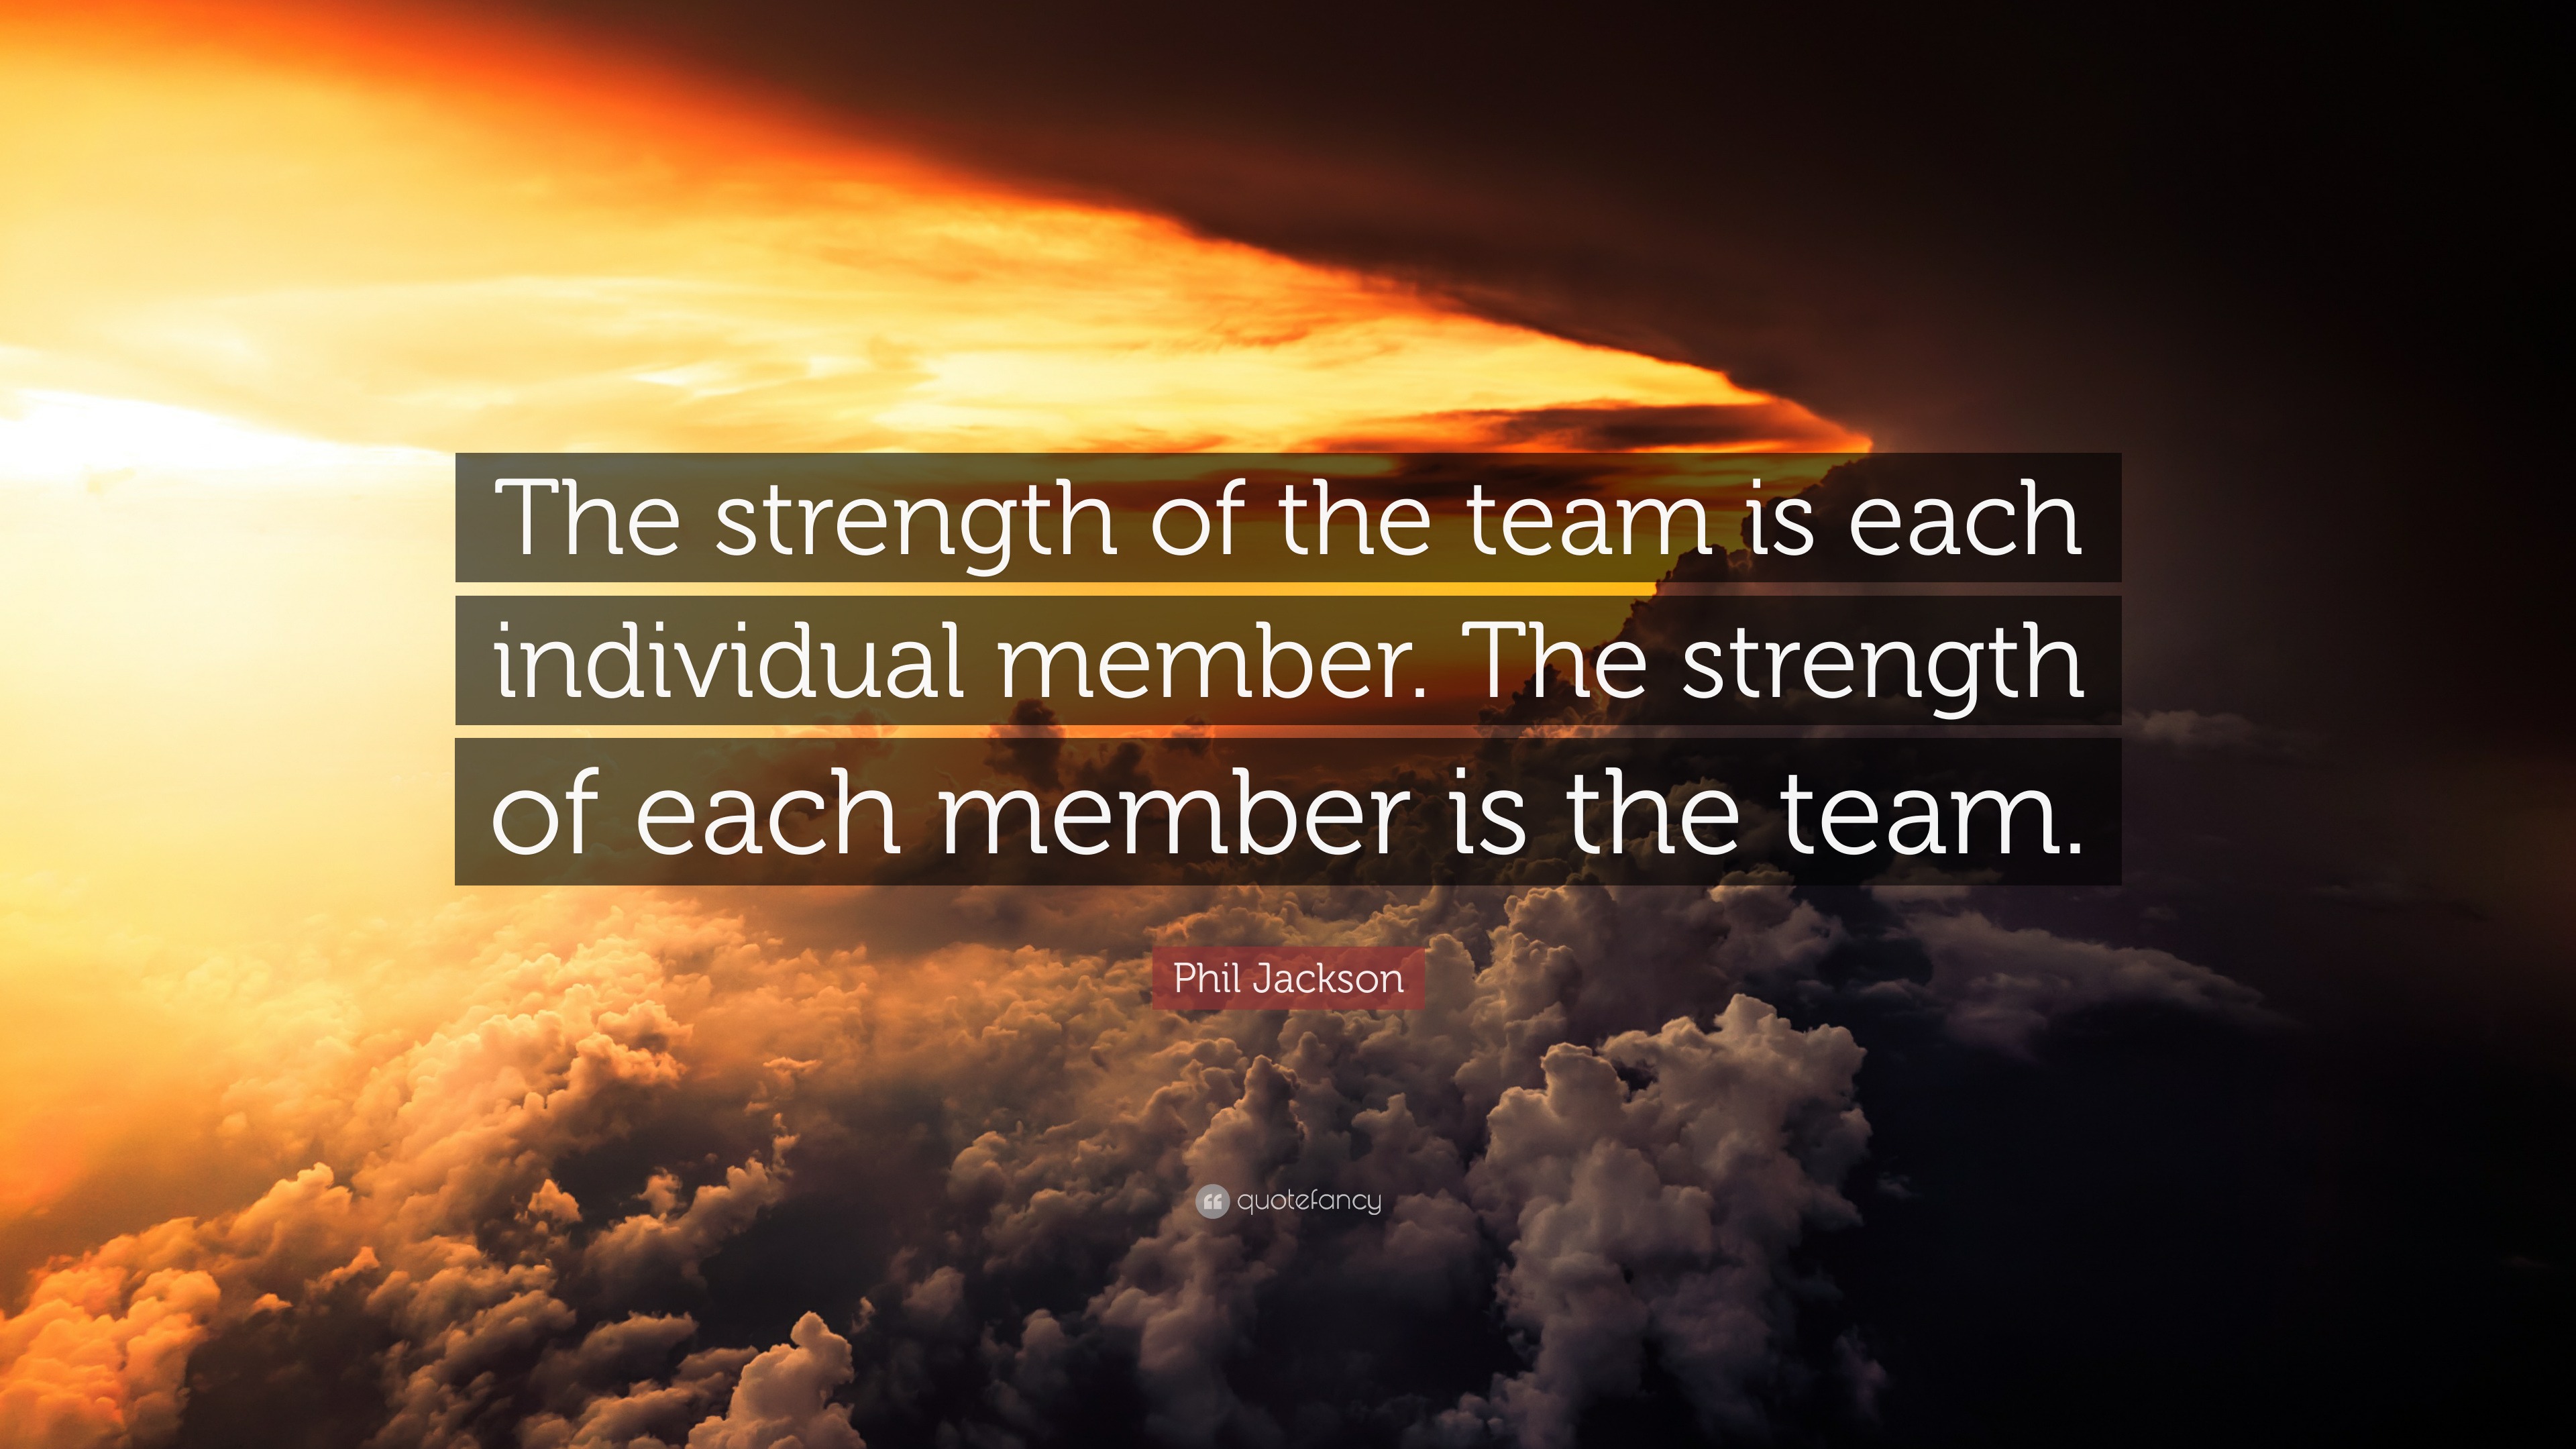 Phil Jackson Quote: “The strength of the team is each individual member